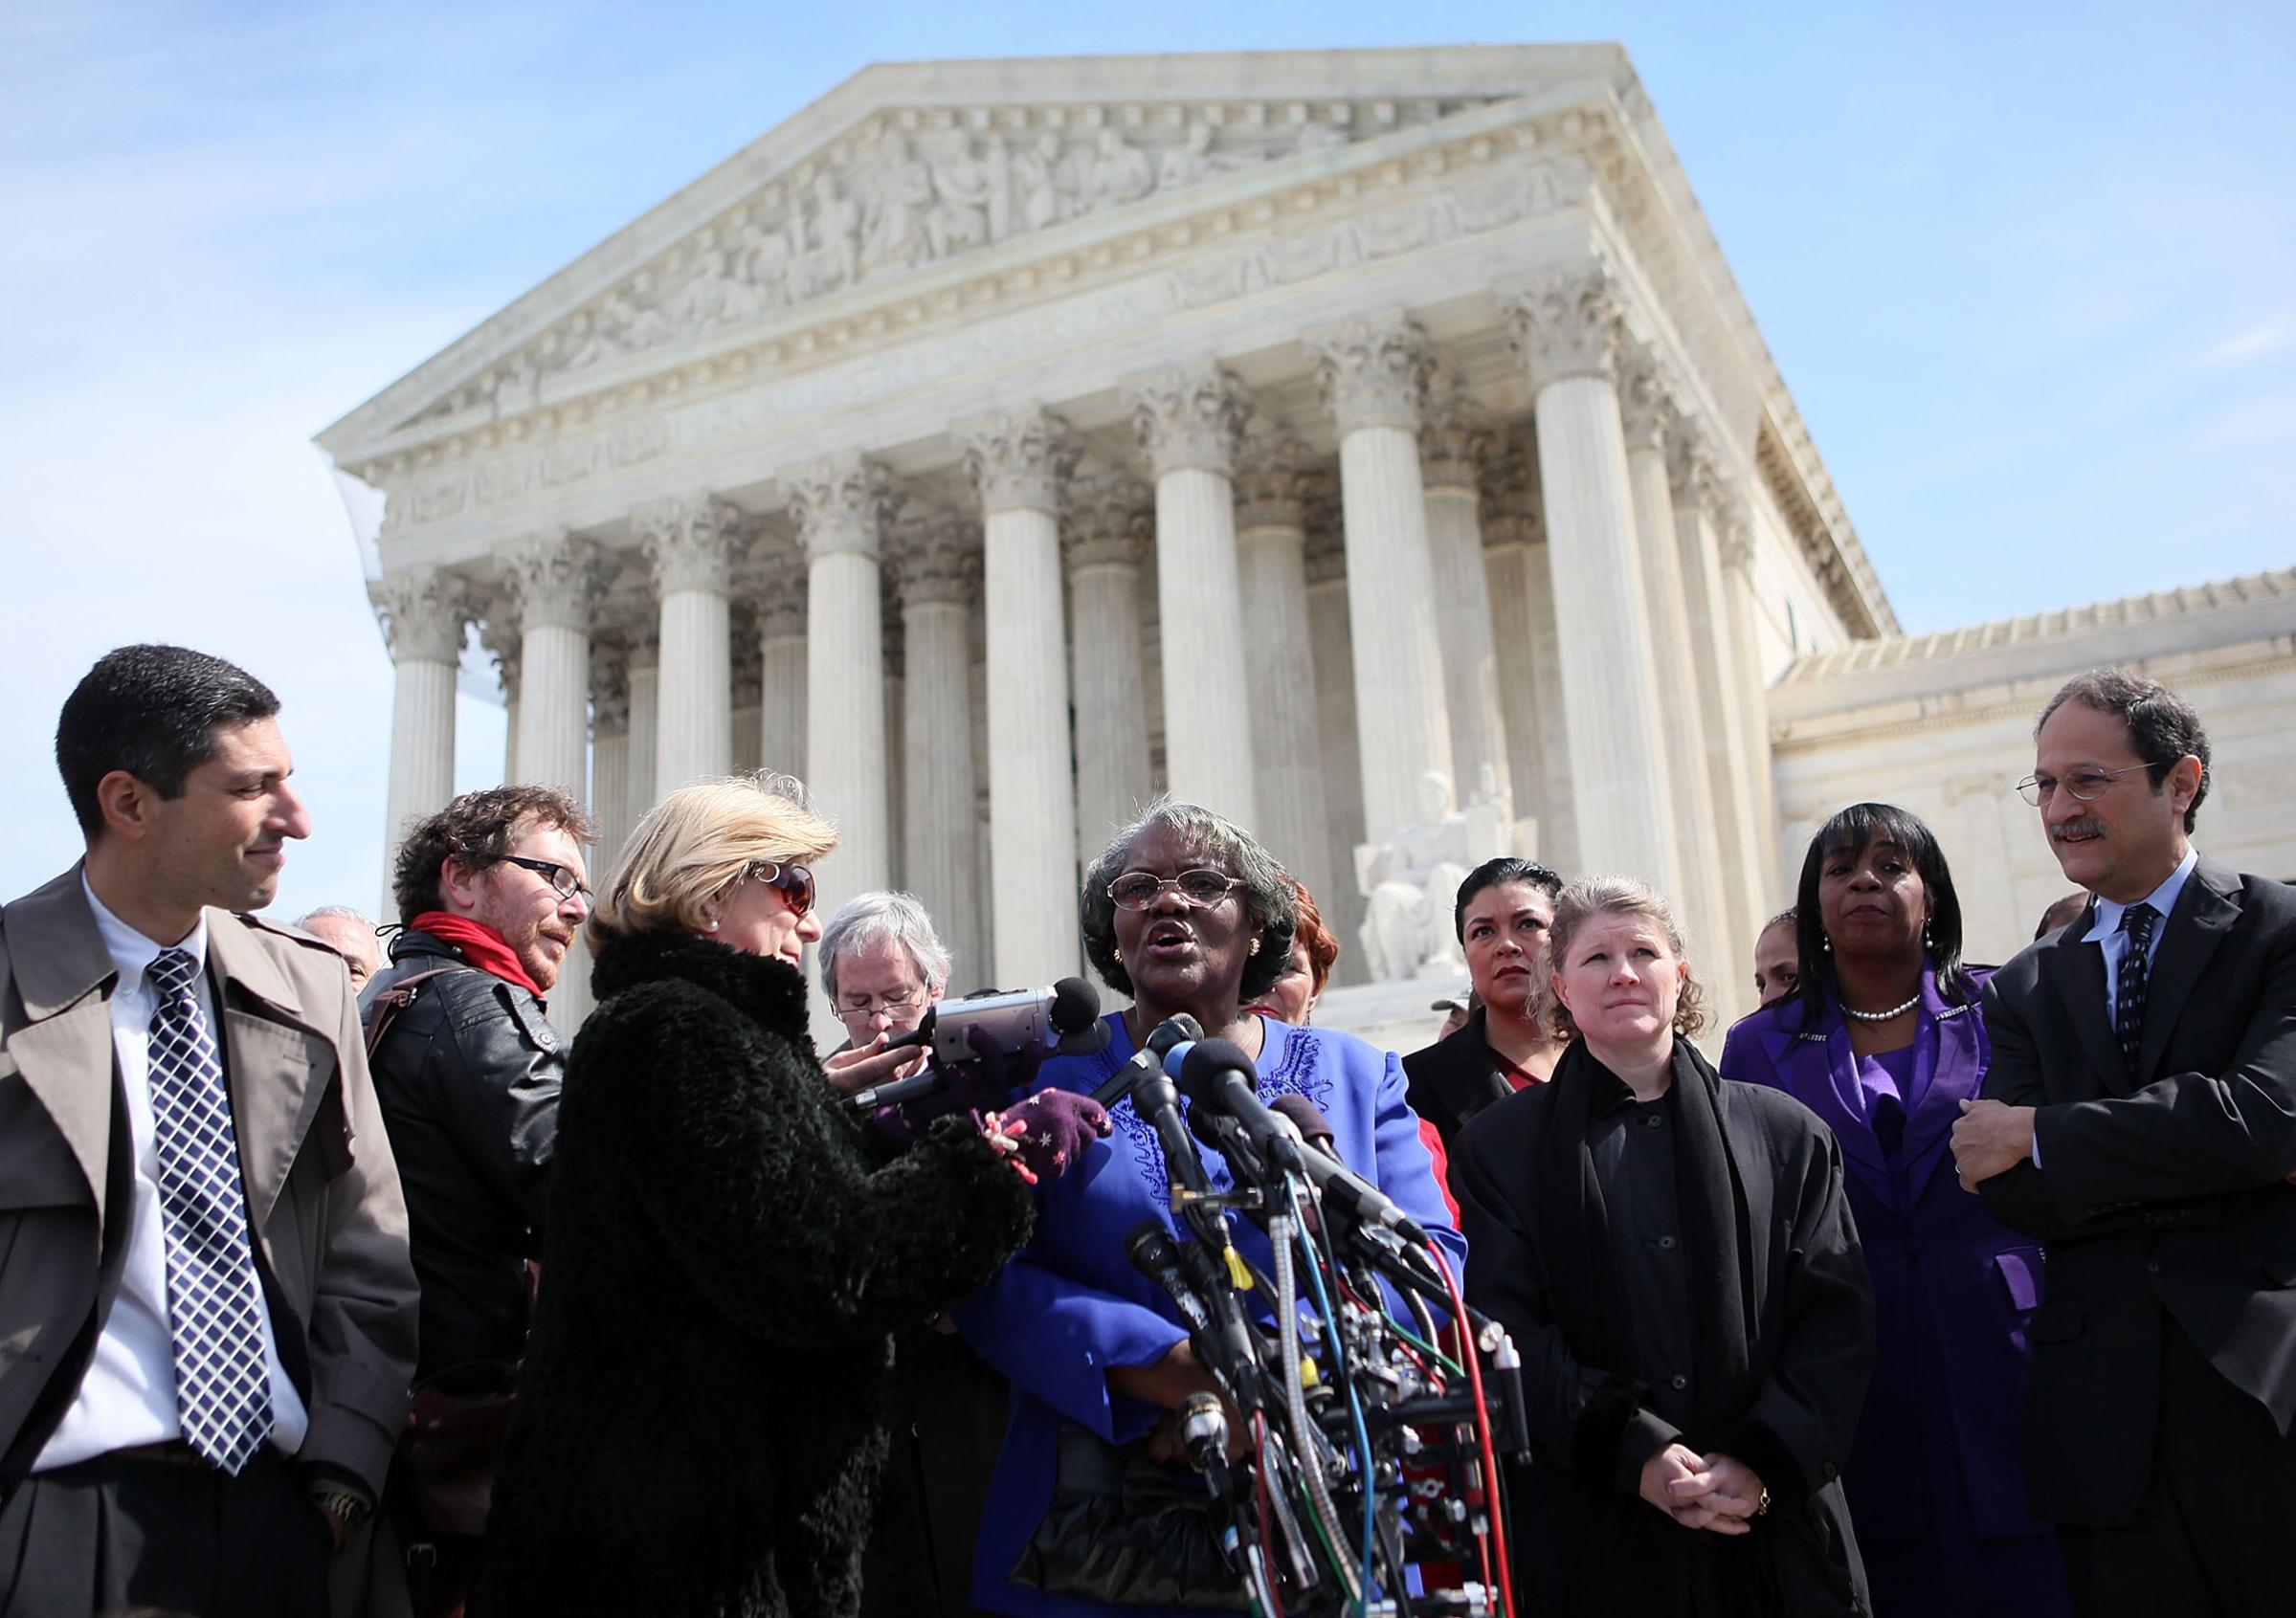 Betty Dukes, the lead plaintiff in the original class action, speaks in front of the Supreme Court in 2011